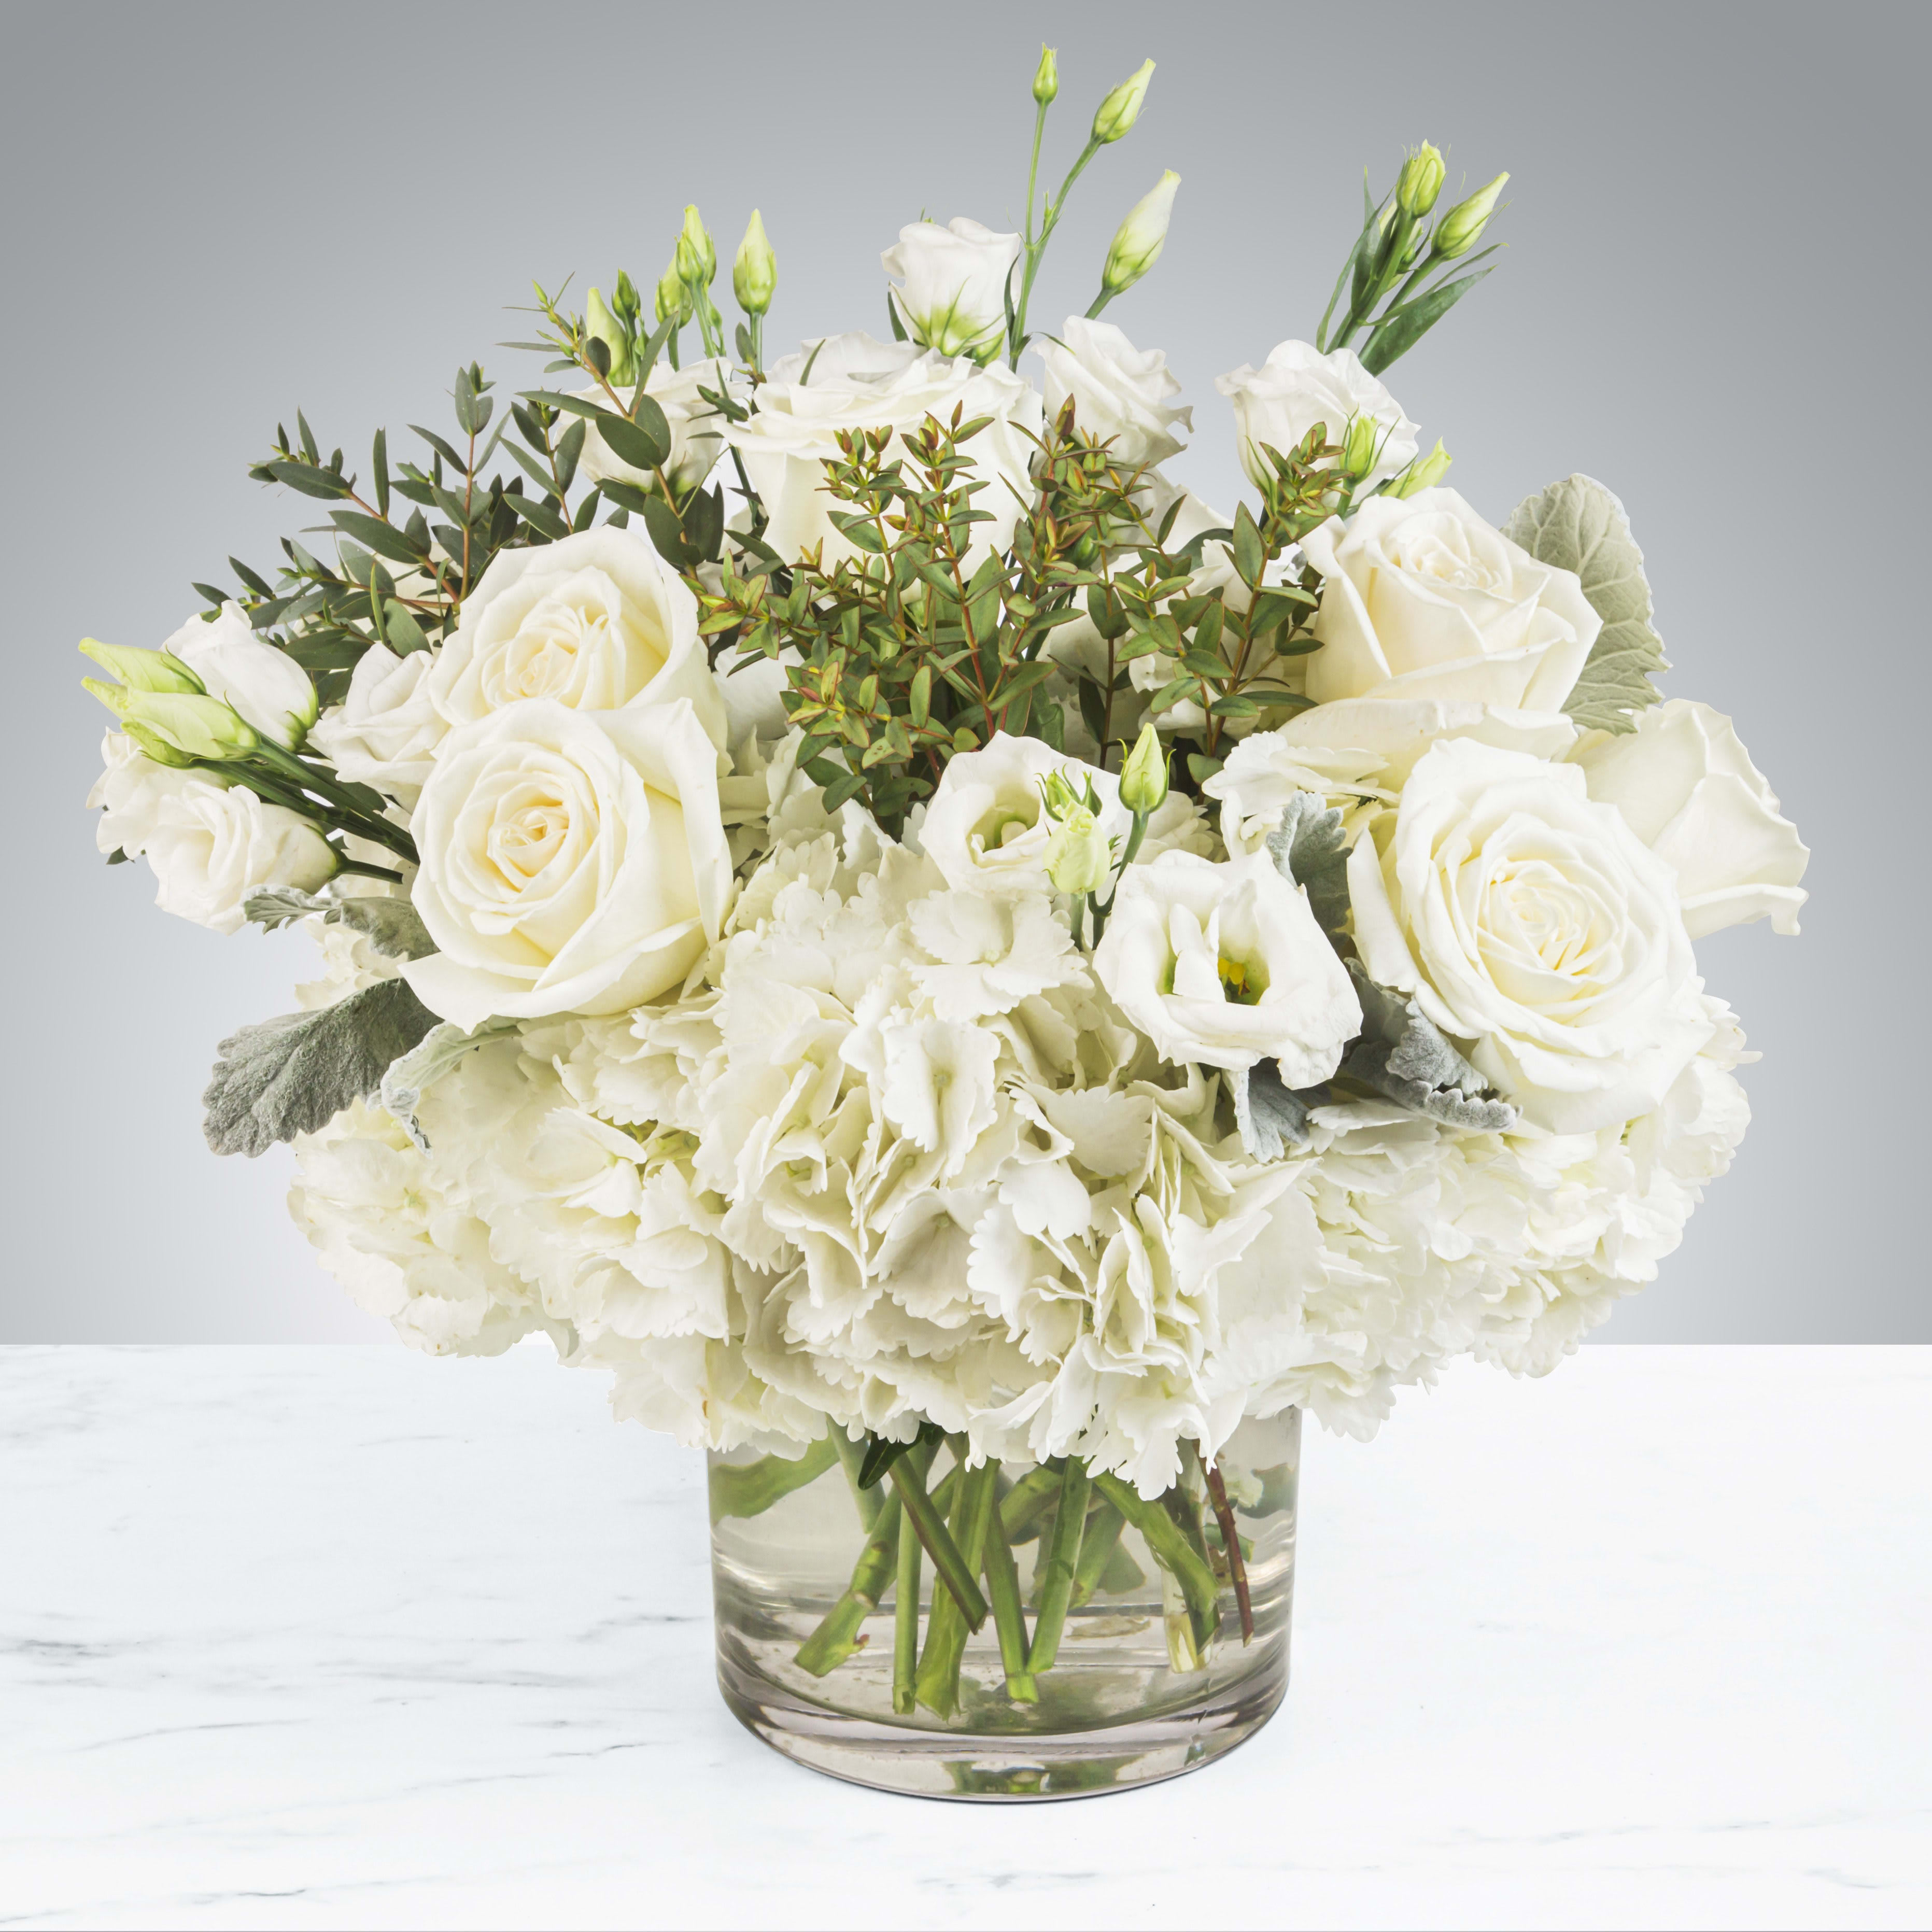 Cloud Nine - New beginnings deserve flowers! This all white arrangement includes roses, lisianthus and hydrangeas. Cloud Nine by BloomNation™ is the perfect gift for celebrating a new year, a new baby, or a newly married couple.   APPROXIMATE DIMENSIONS 15&quot; W X 13&quot; H